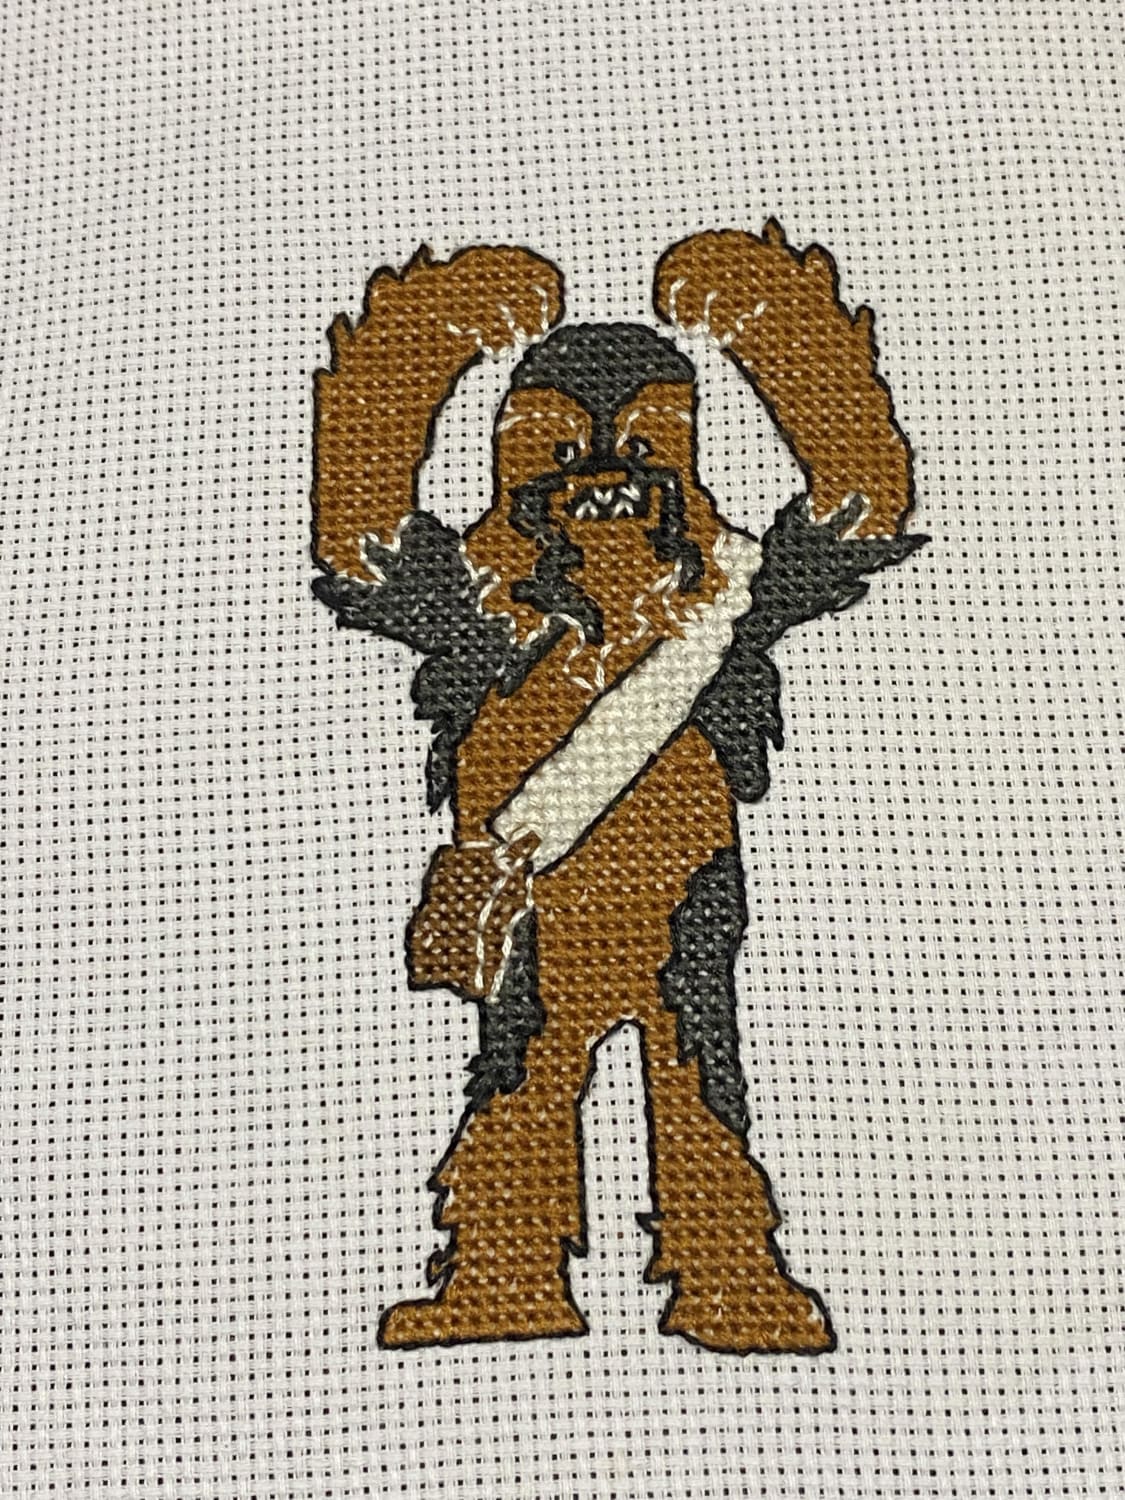 [FO] Reconnected with my pre-teen love of CrossStitch